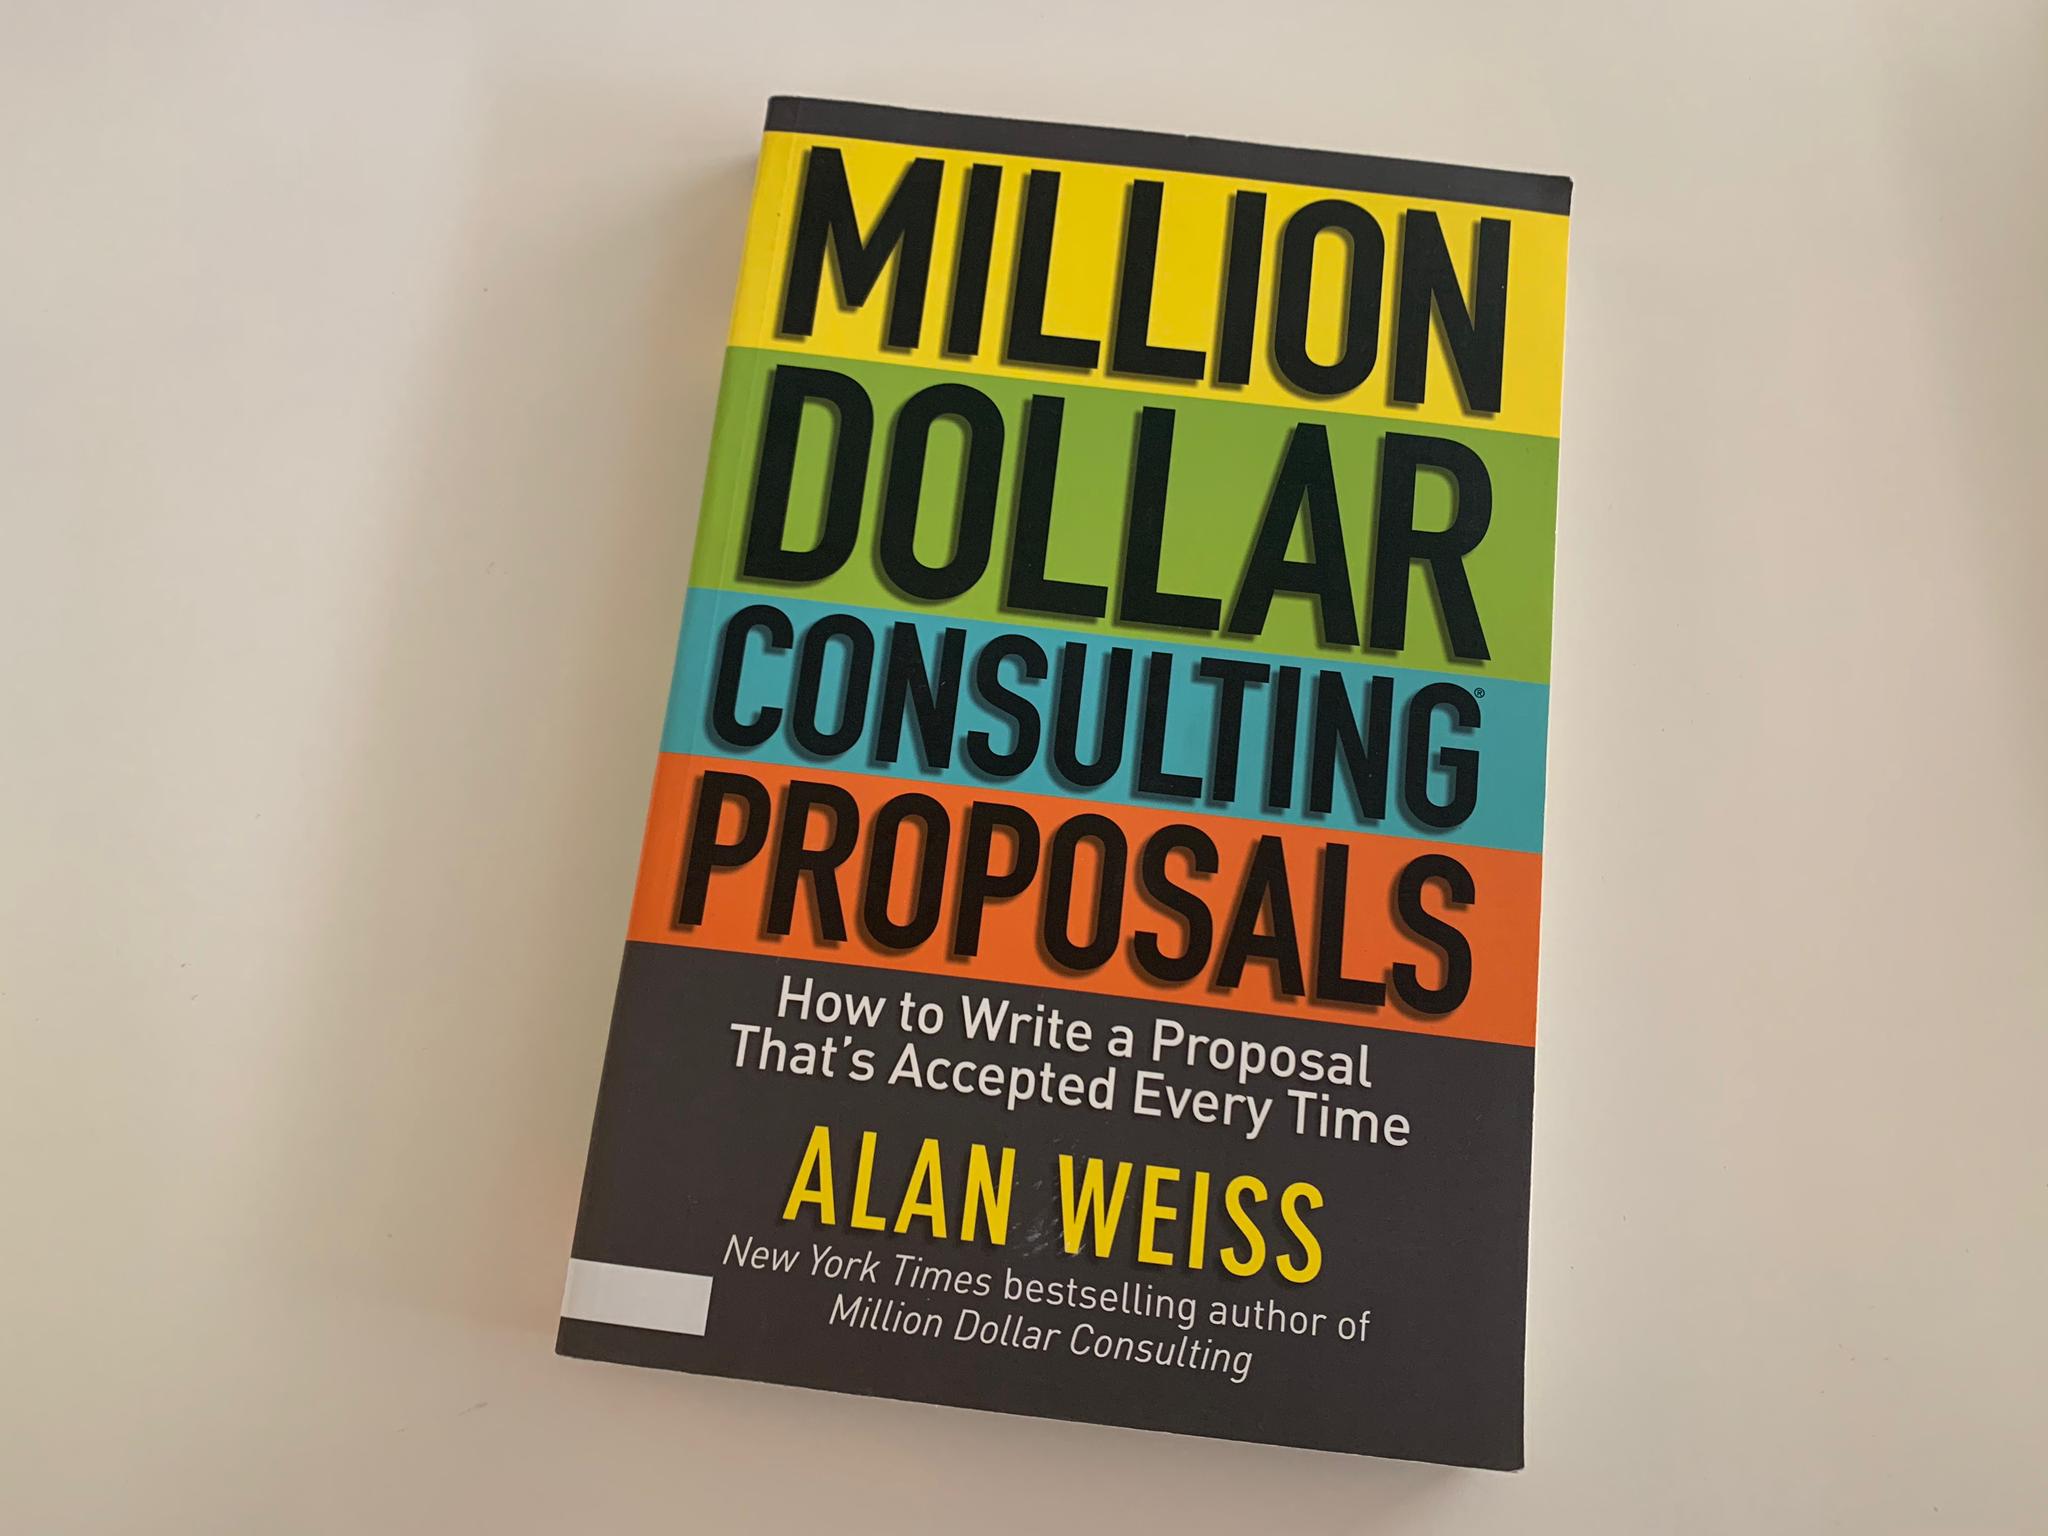 Million dollar consulting proposals